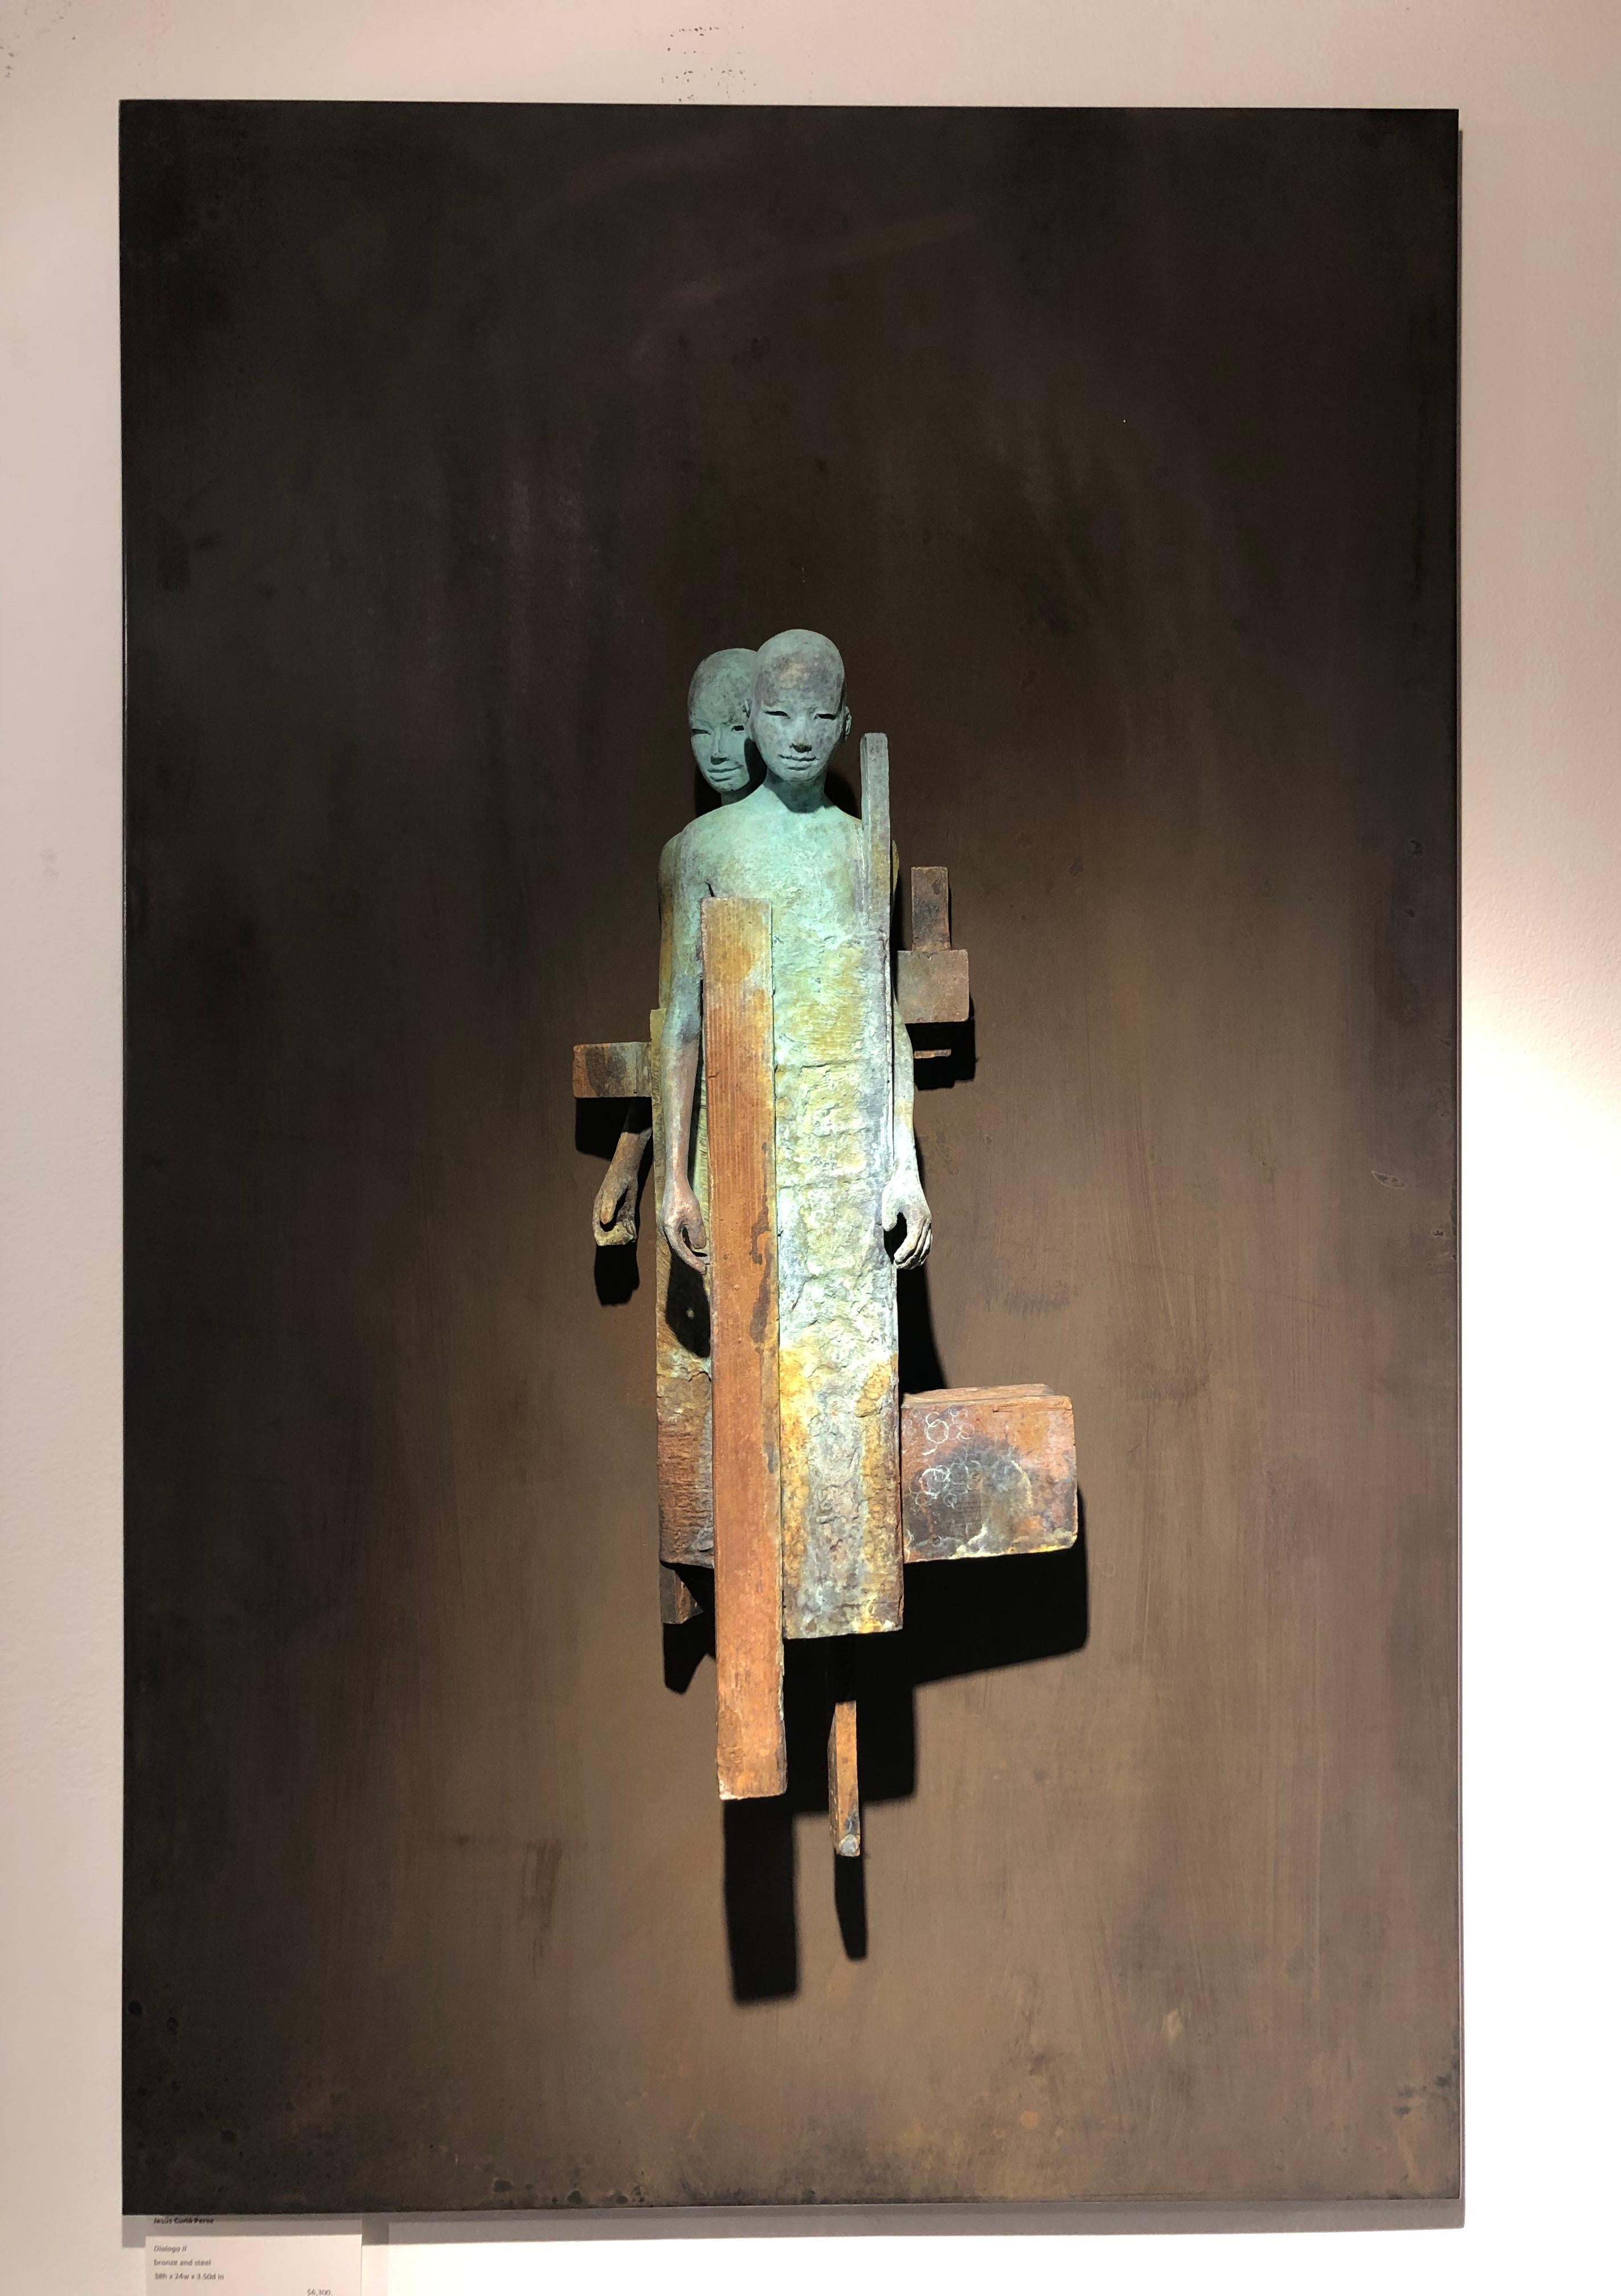 Dialogo II - Bronze Wall Sculpture With Verdegris, Rust Patina and 2 Figures - Gold Figurative Sculpture by Jesus Curia Perez